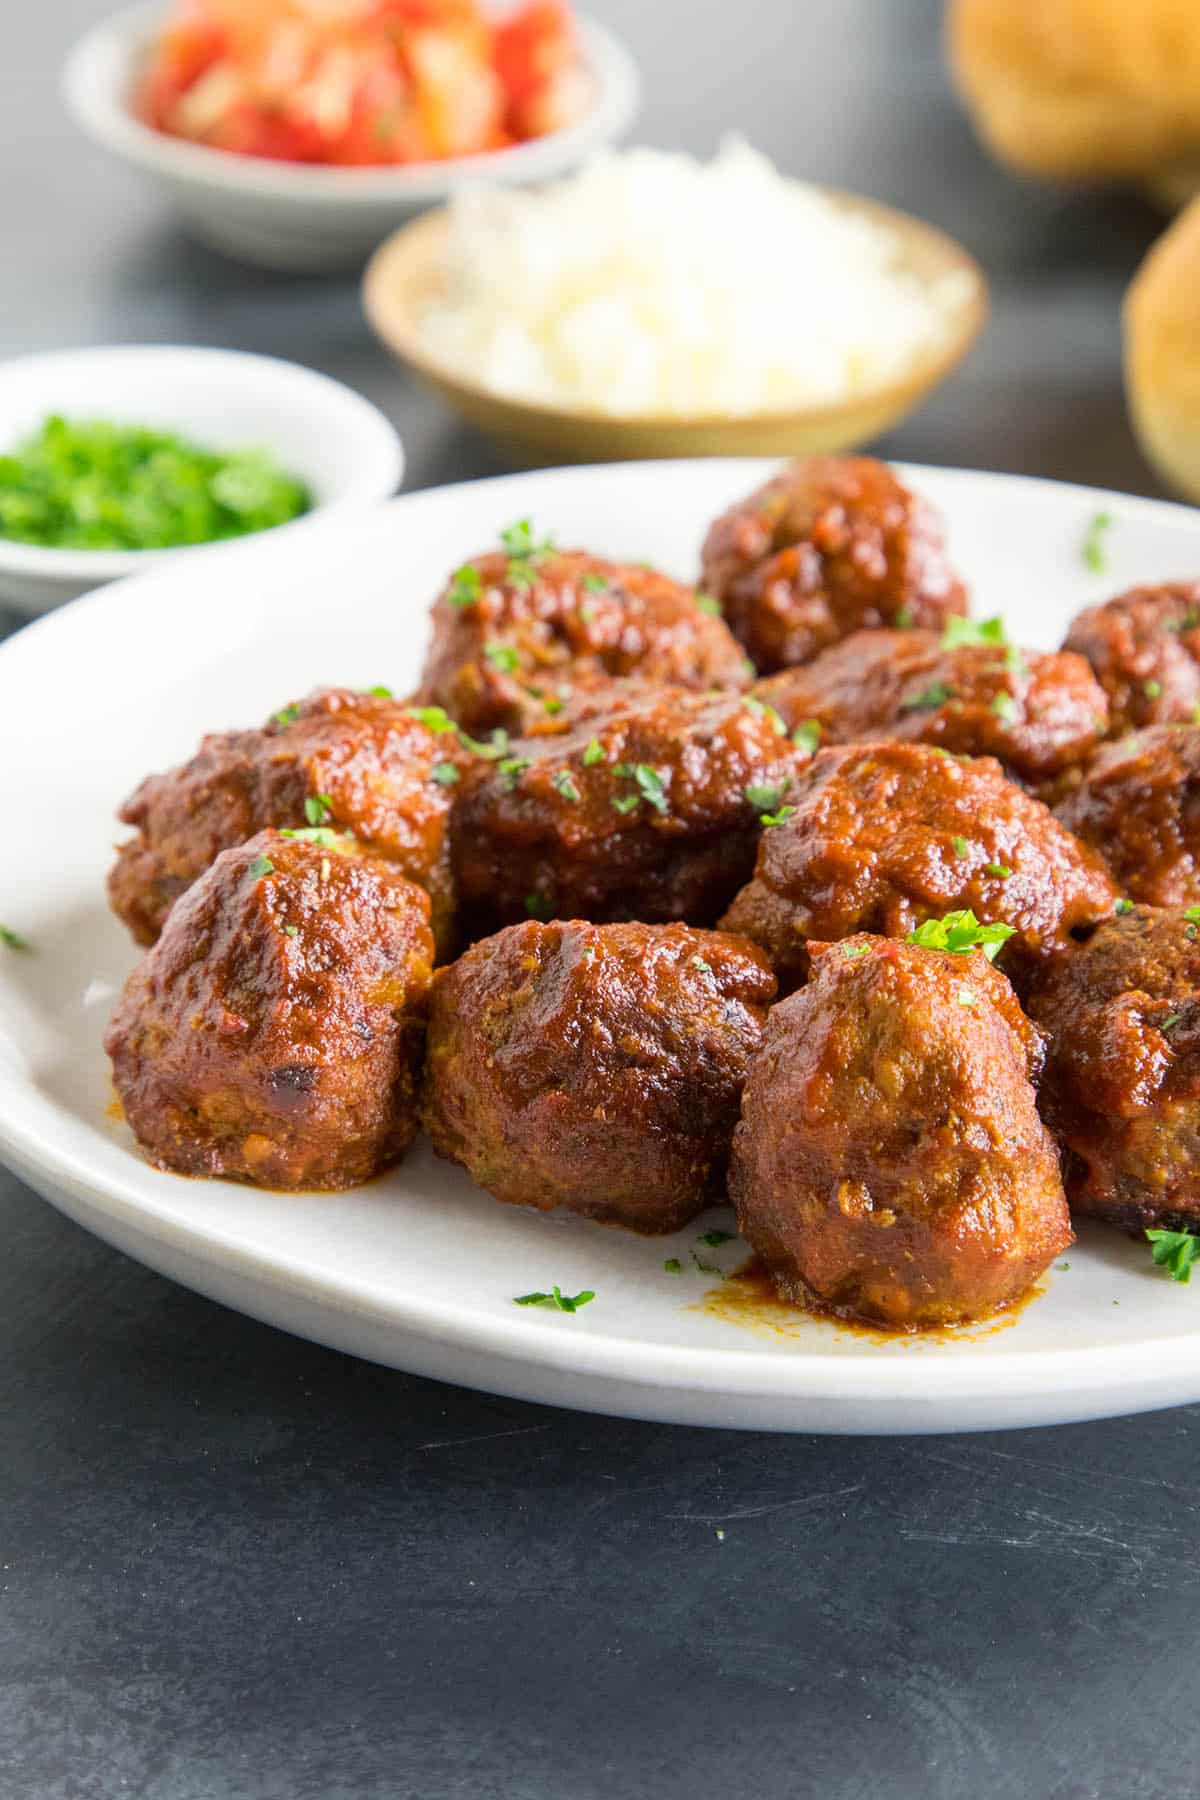 Spicy Meatballs Chipotle Lime Sauce Recipe - Ready for your next party